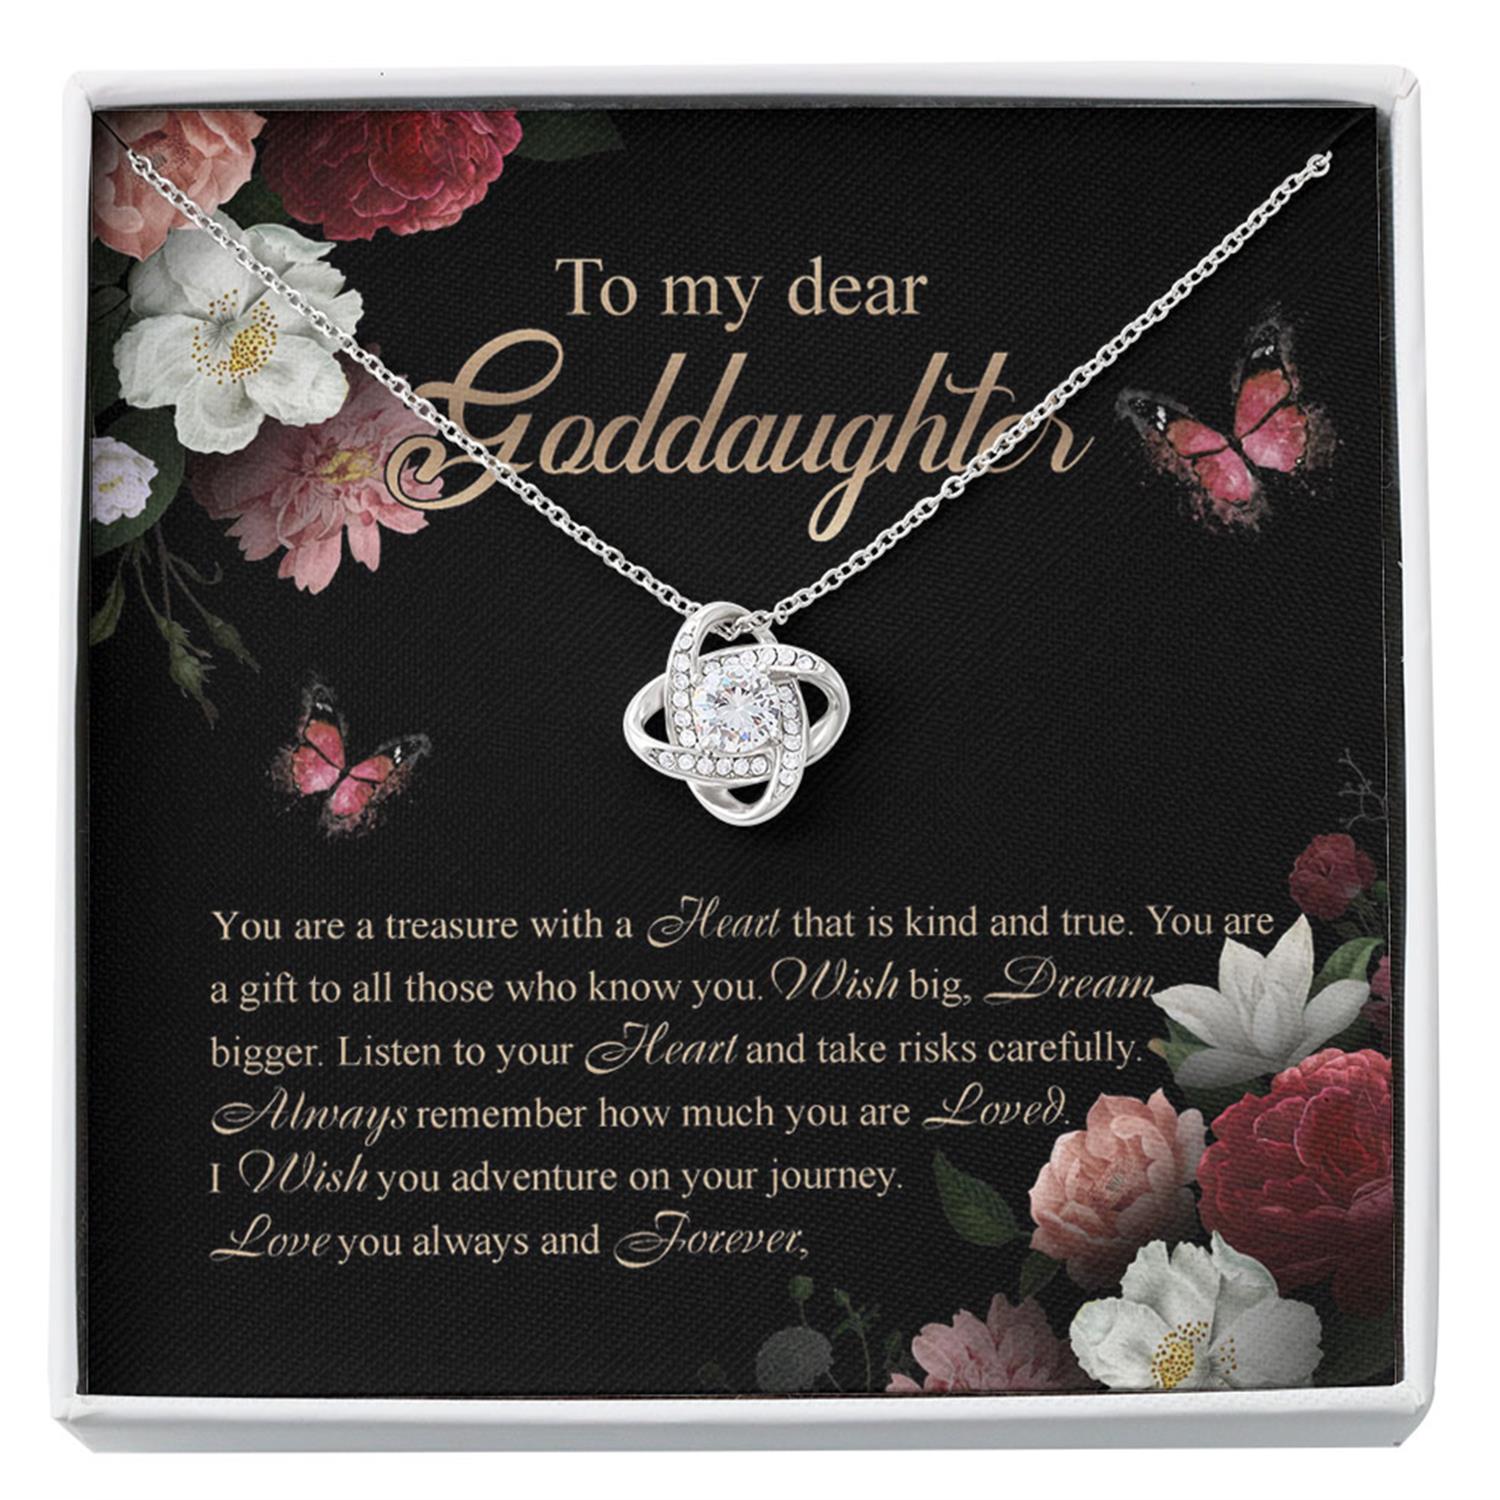 Goddaughter Necklace, Confirmation Gifts For Girls, Goddaughter Gifts From Godmother, Baptism Gift, First Communion Custom Necklace